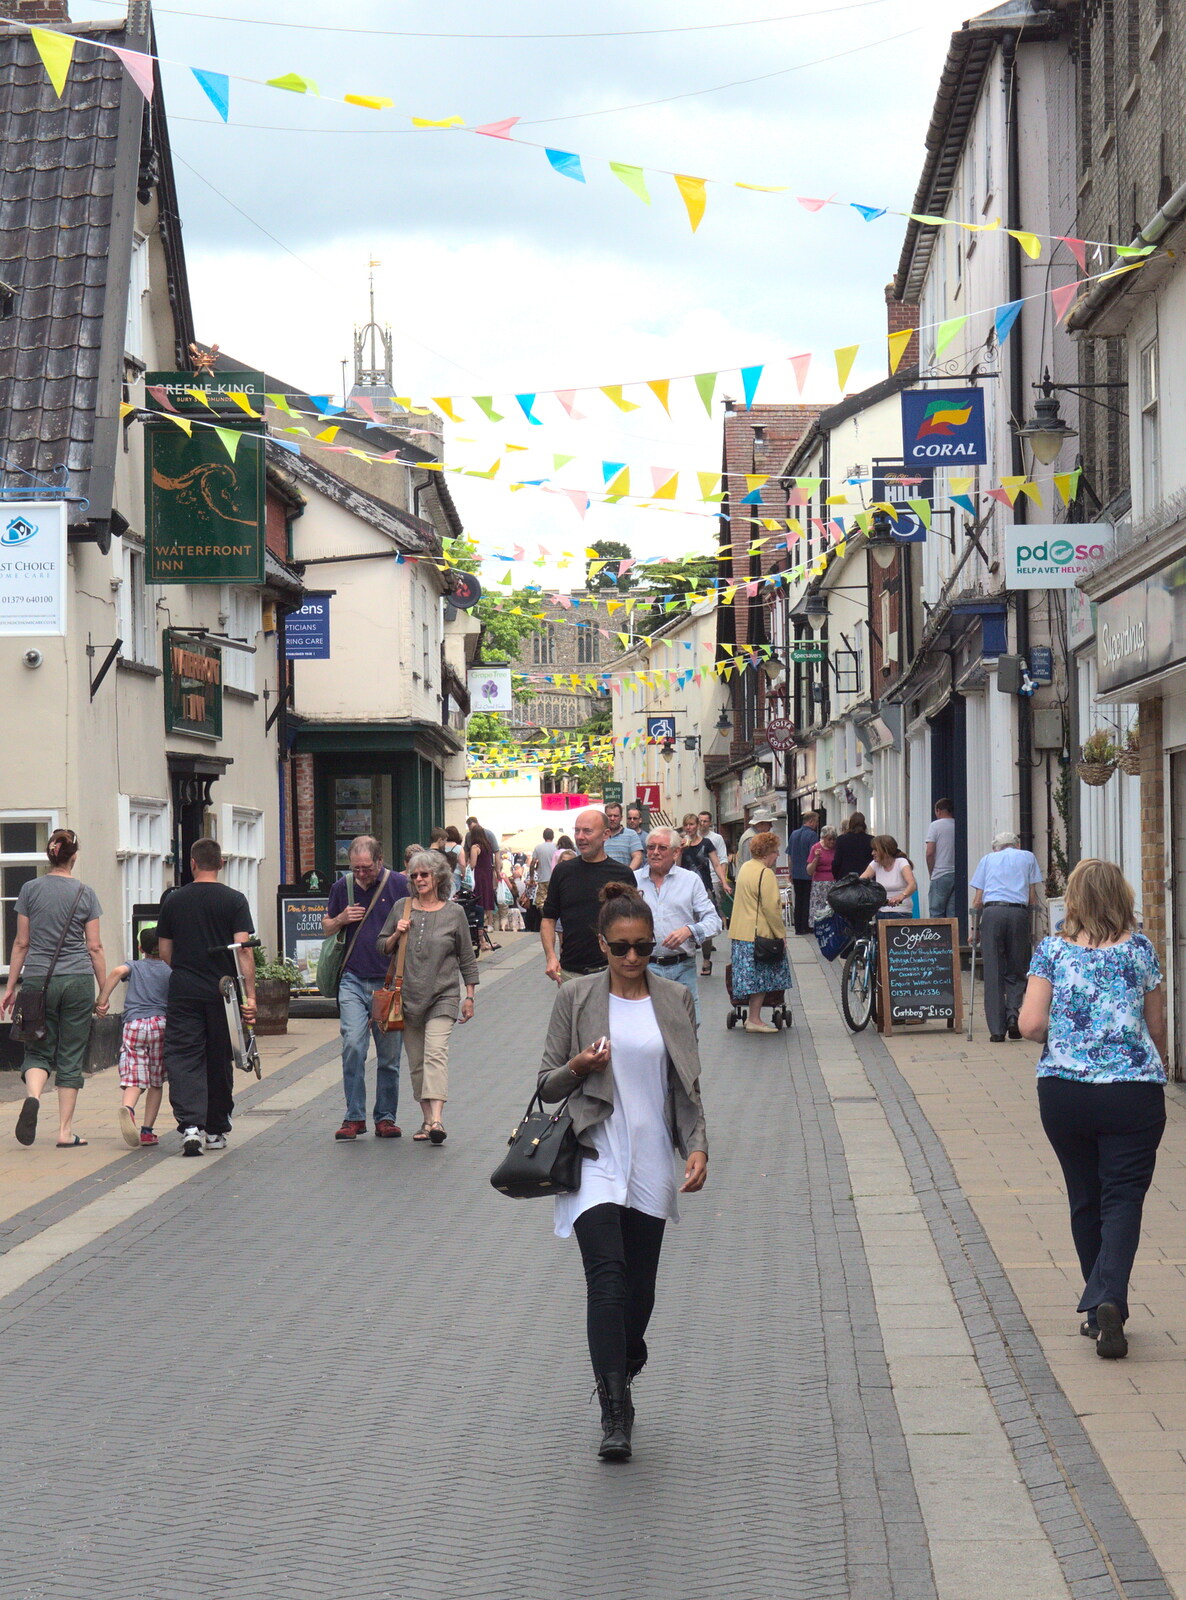 Mere Street in Diss has some bunting going on from A visit from Da Gorls, Brome, Suffolk - 27th June 2015